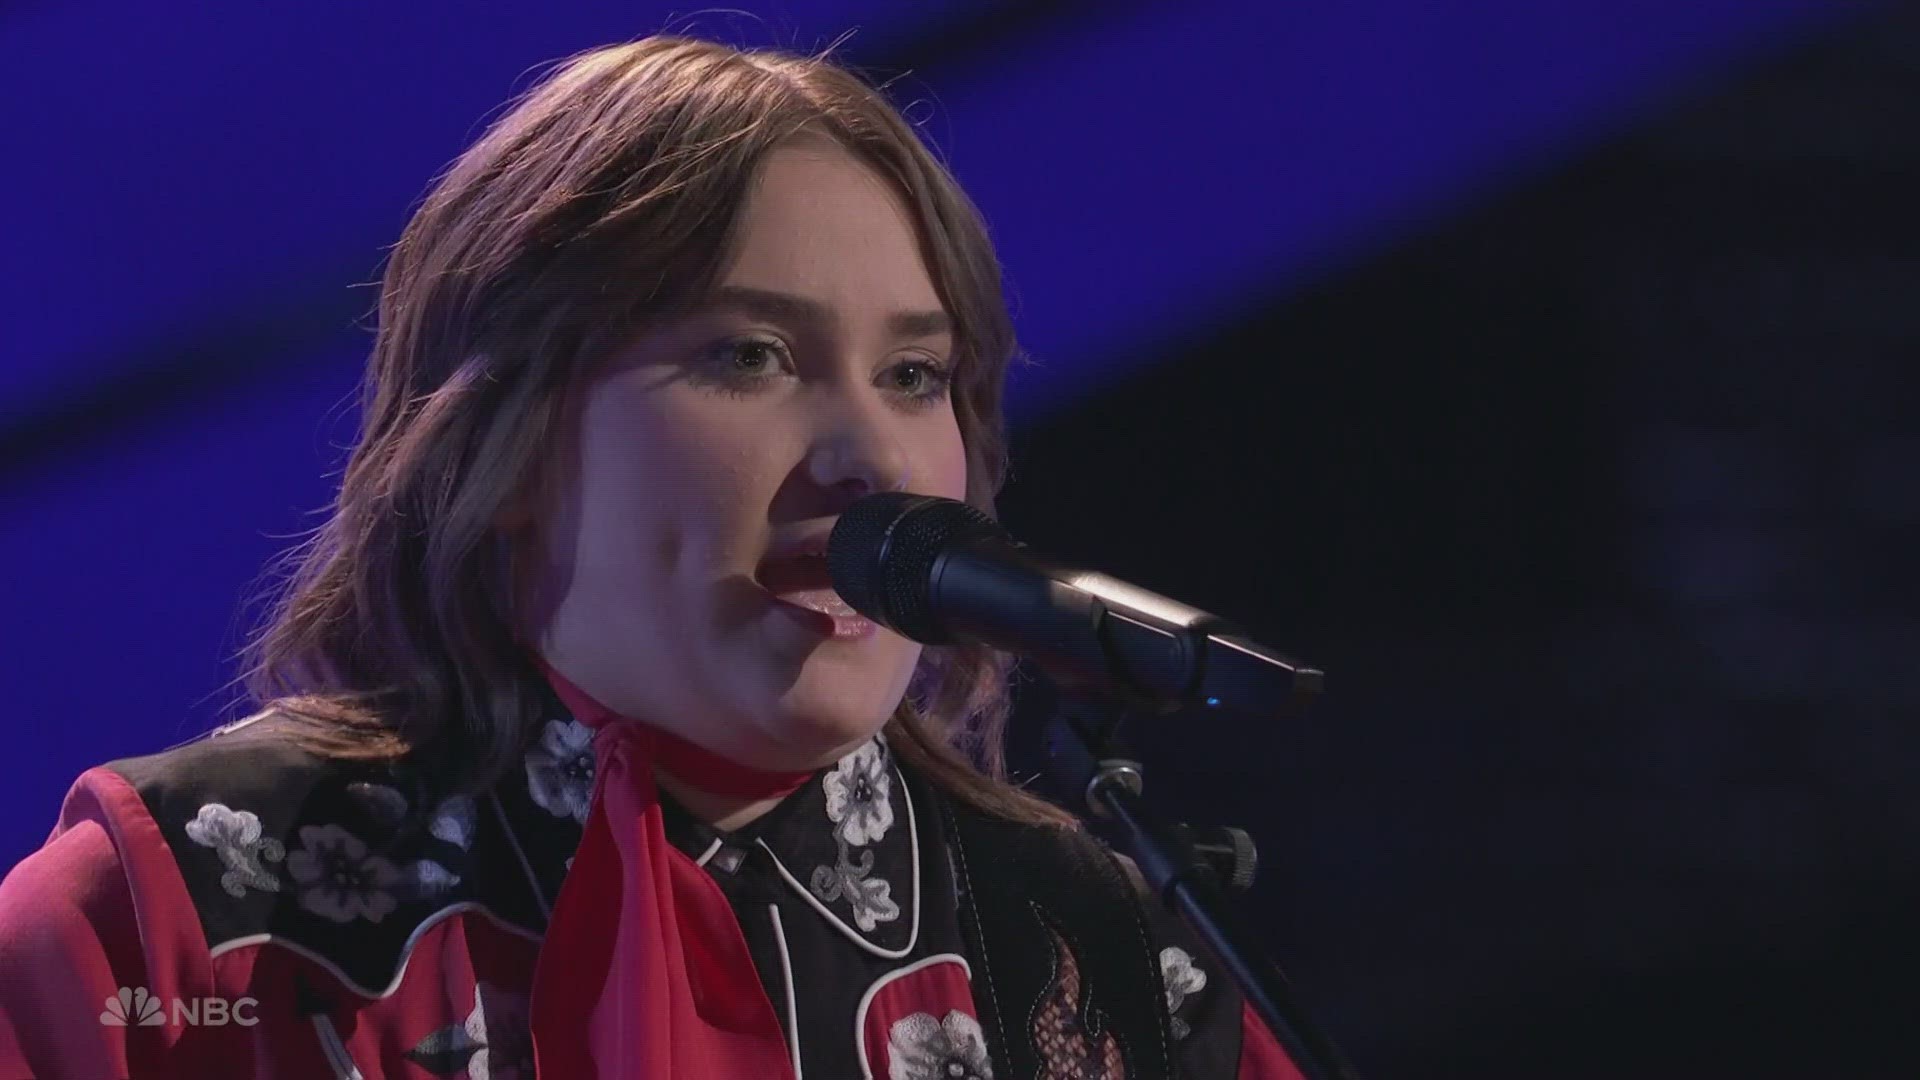 A local from Missouri, Ruby Leigh, got to perform for the judges on Tuesday as the blind auditions continued. The teen's yodeling skills turned all four chairs.